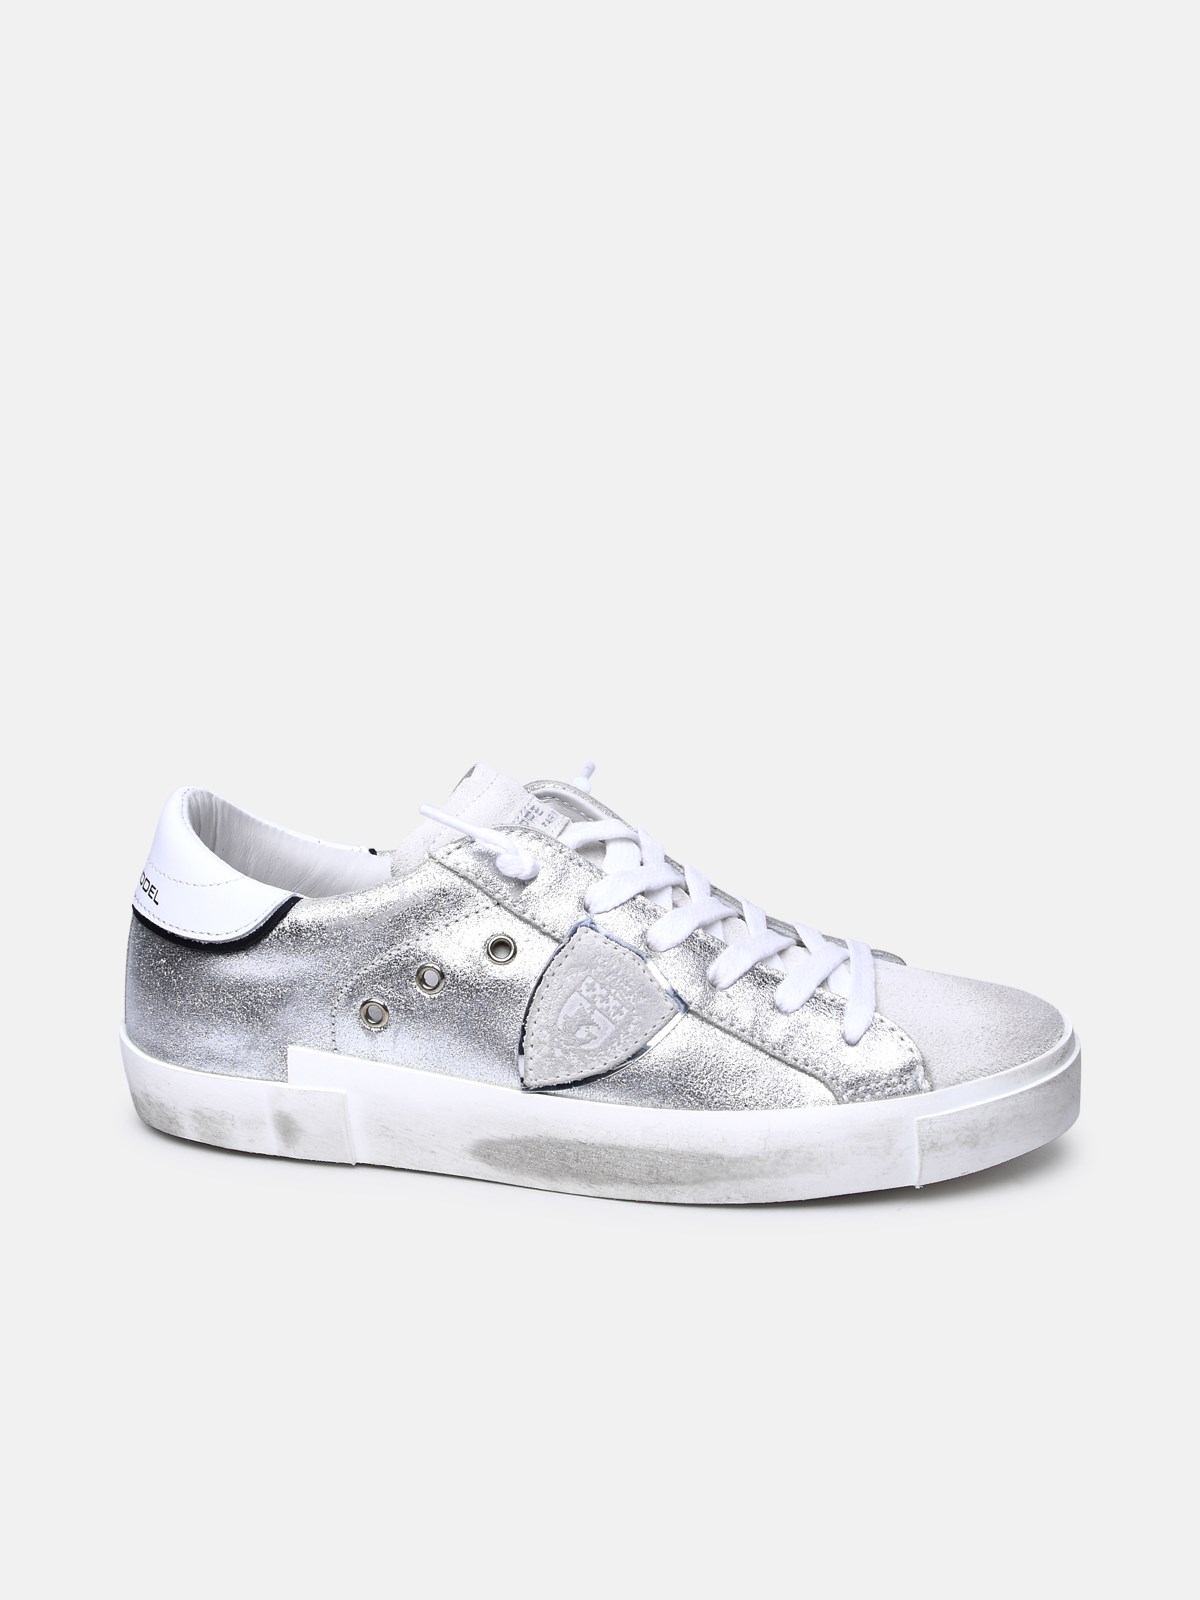 Philippe Model Silver Leather Sneakers